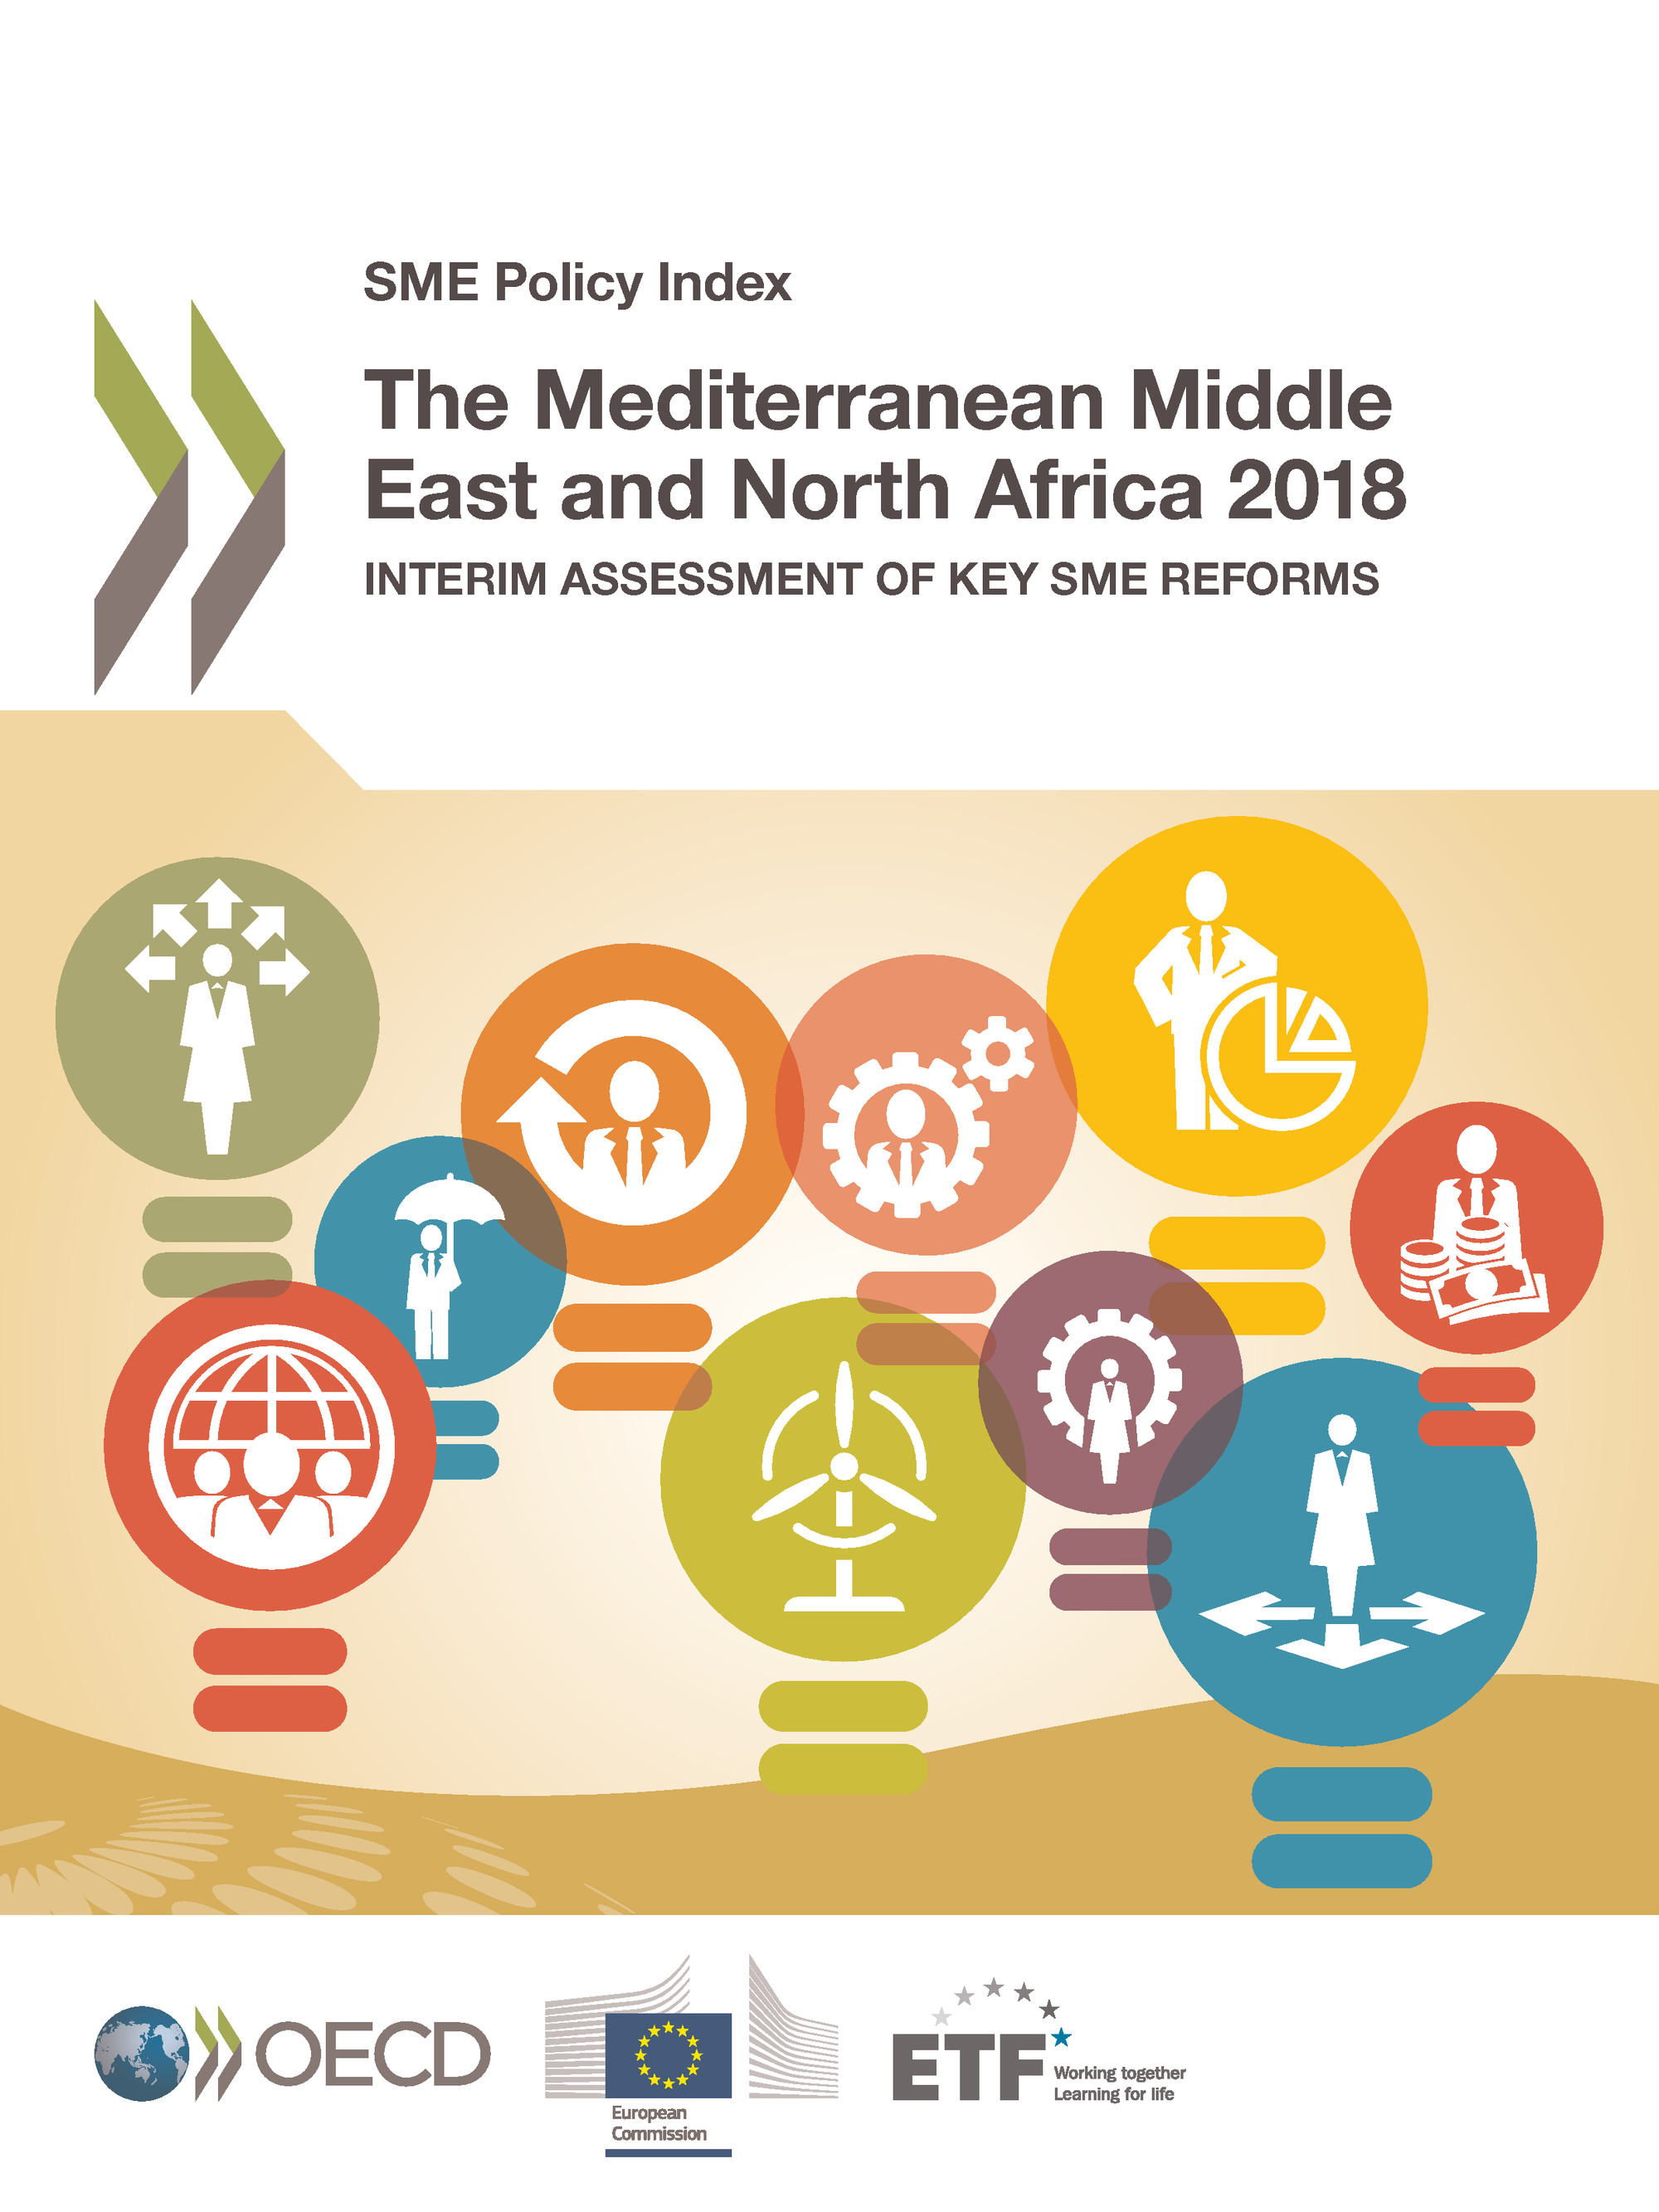 The Mediterranean Middle East and North Africa 2018 -  Collectif - OCDE / OECD